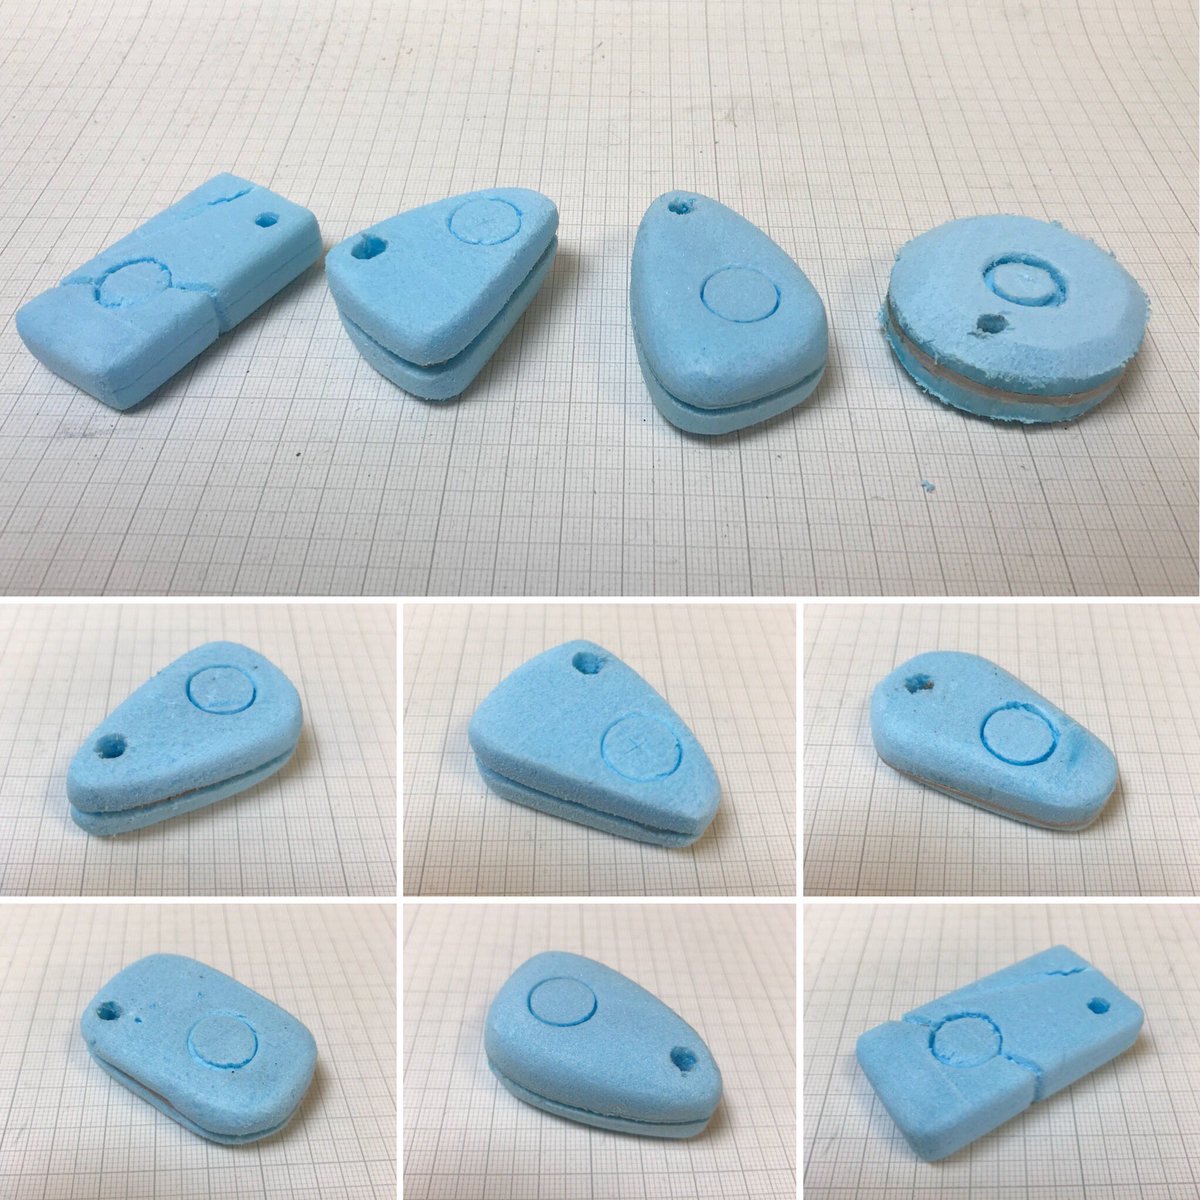 #Yr10 #gcsedesigntechnology great end to the term for this group some fantastic Lesson 2: Blue Foam modelling: Car key fobs #dt #dtchat #bluefoam